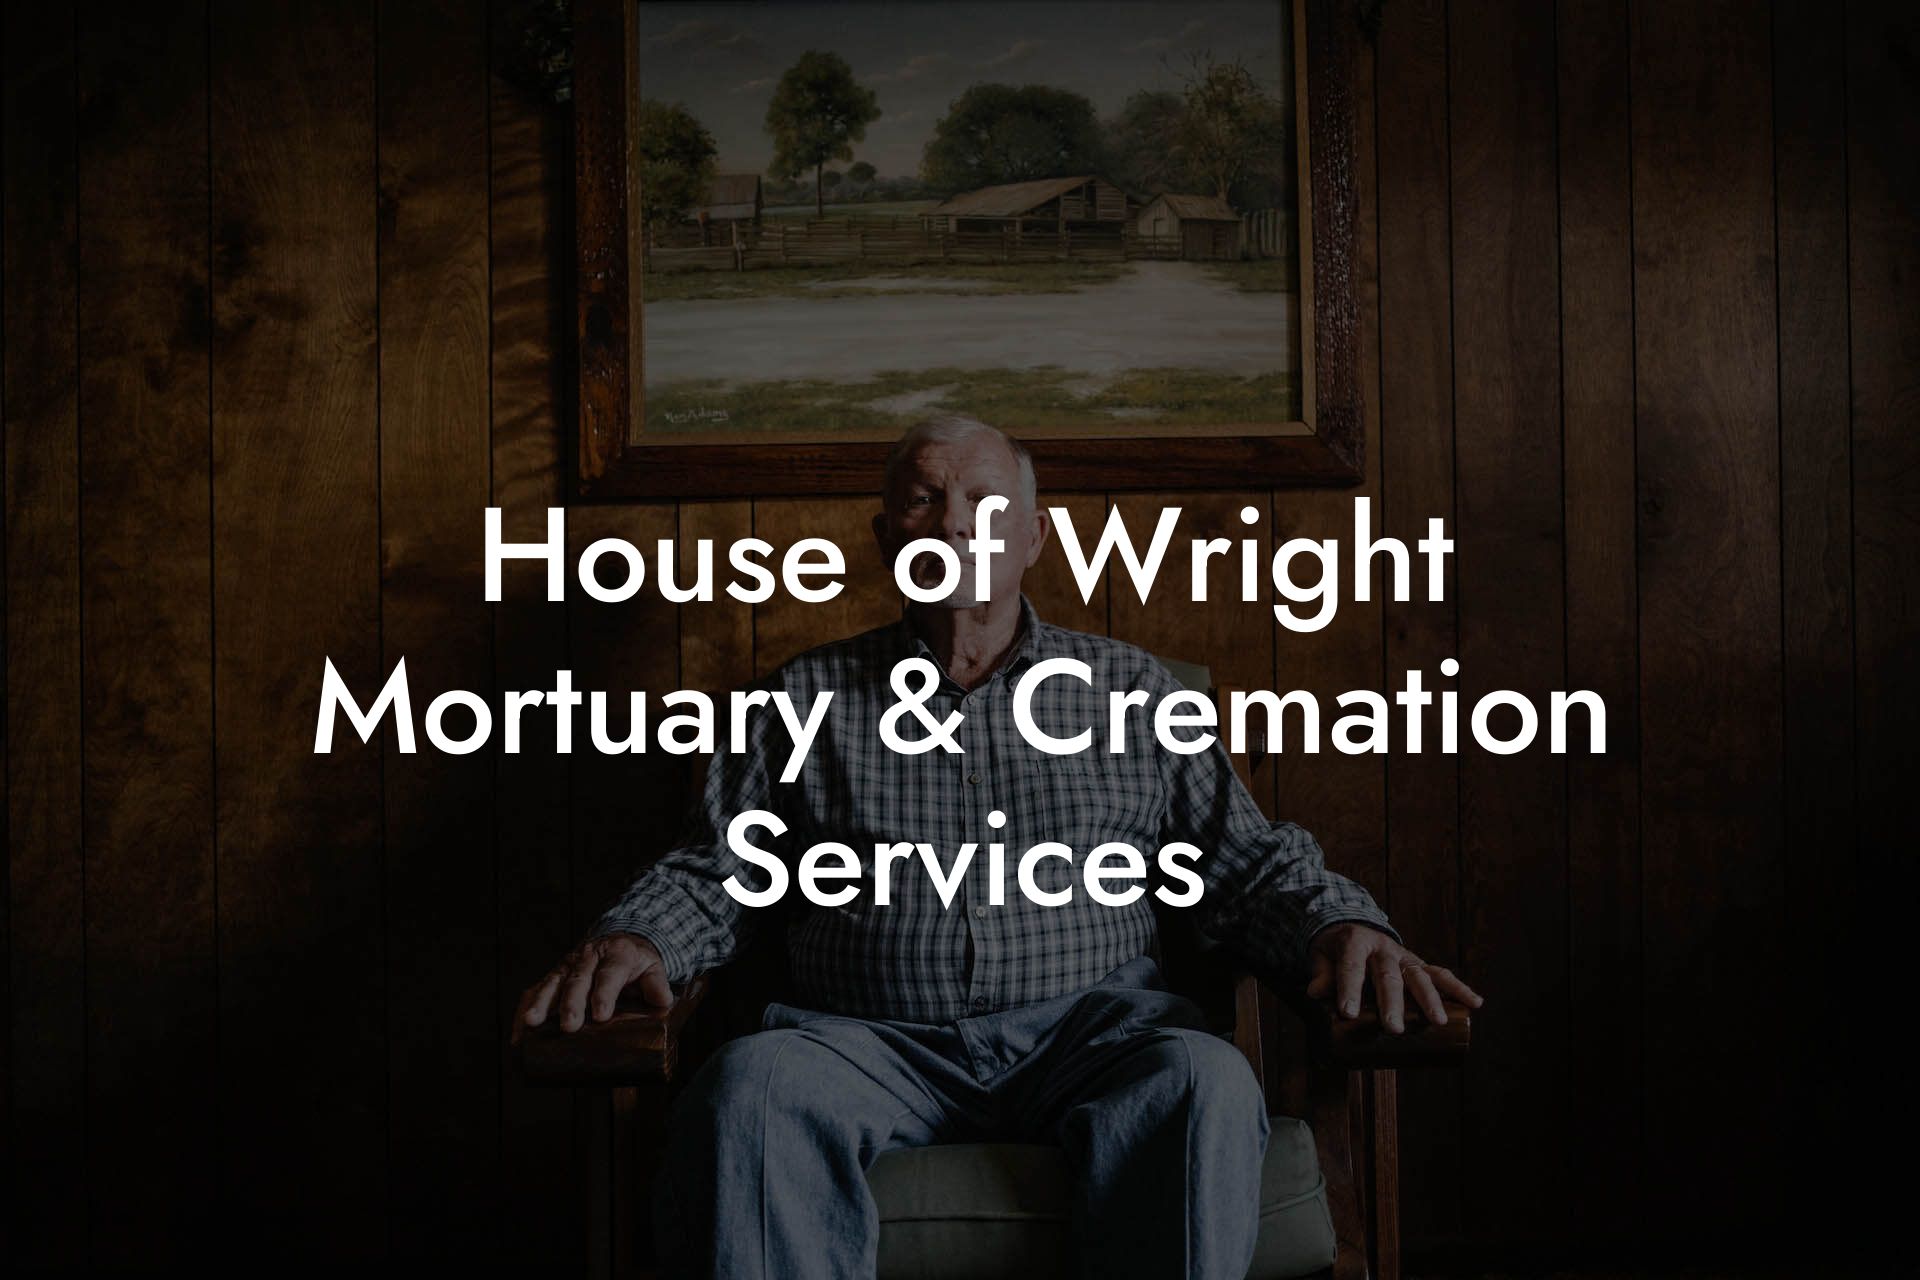 House of Wright Mortuary & Cremation Services